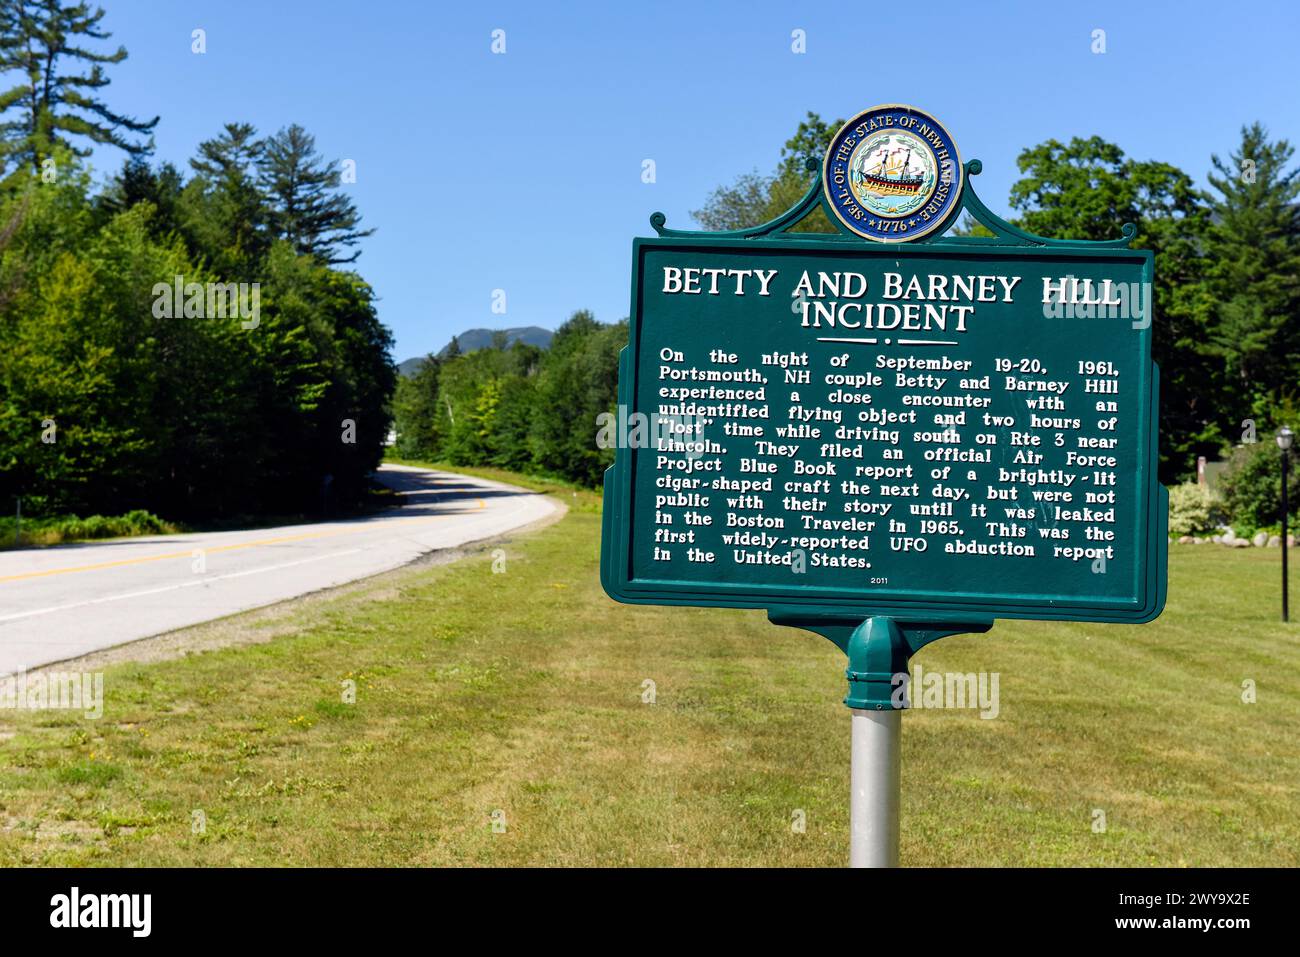 The sign commemorating the Betty and Barney Hill UFO abduction incident. Stock Photo